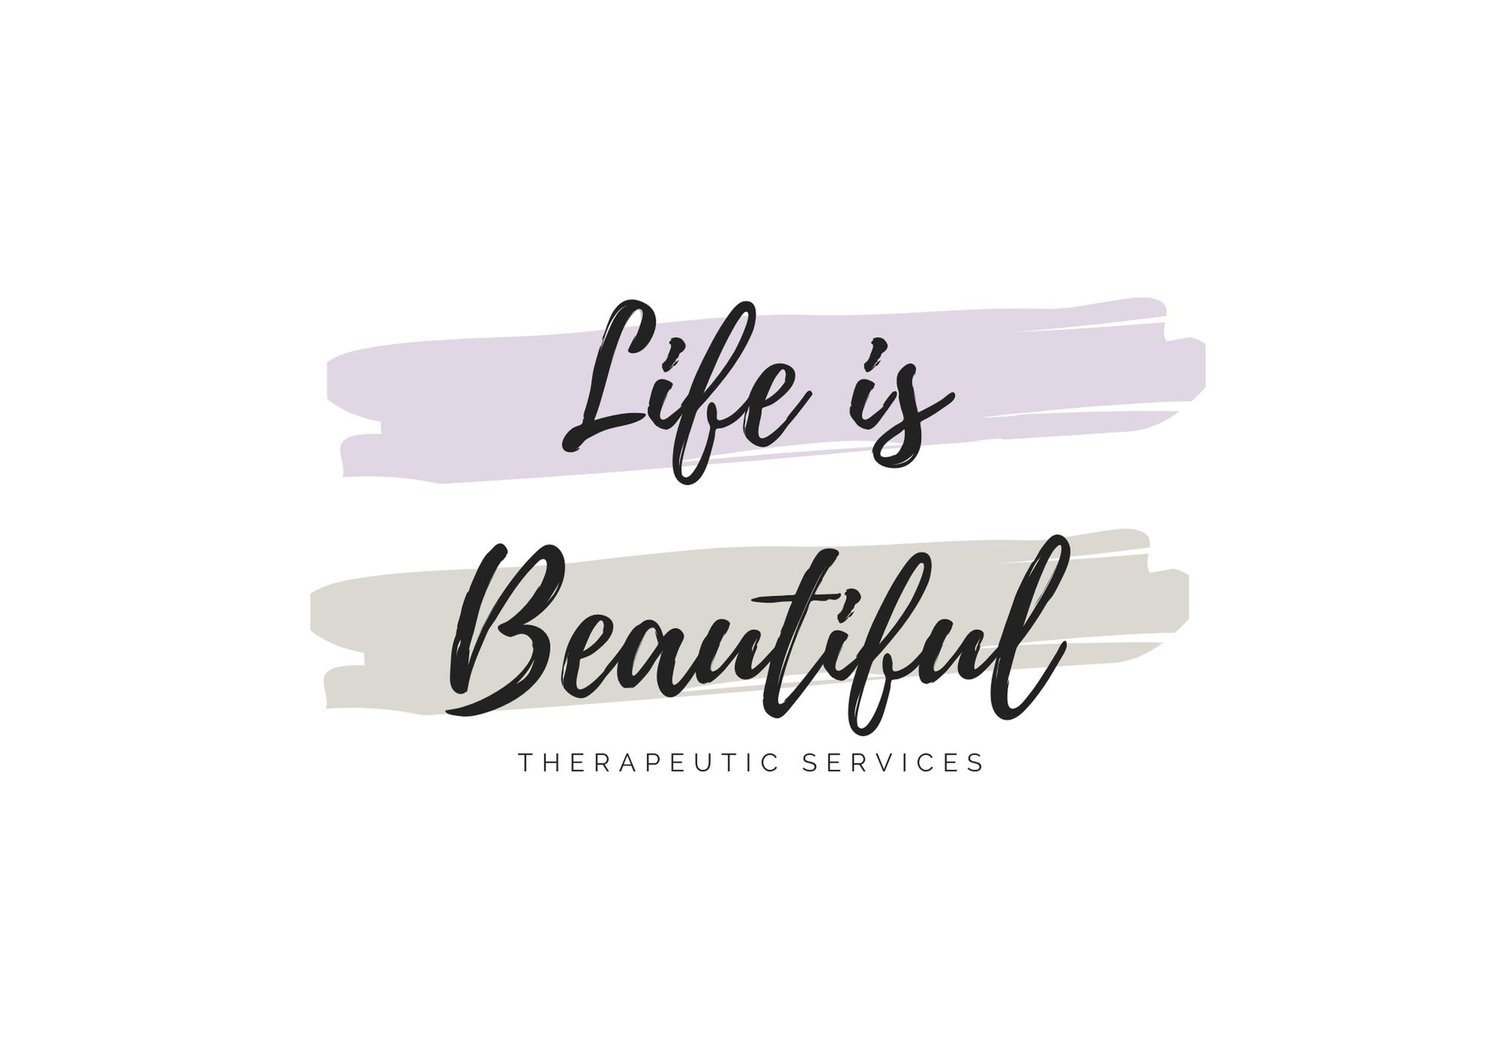 Life is Beautiful Therapeutic Services